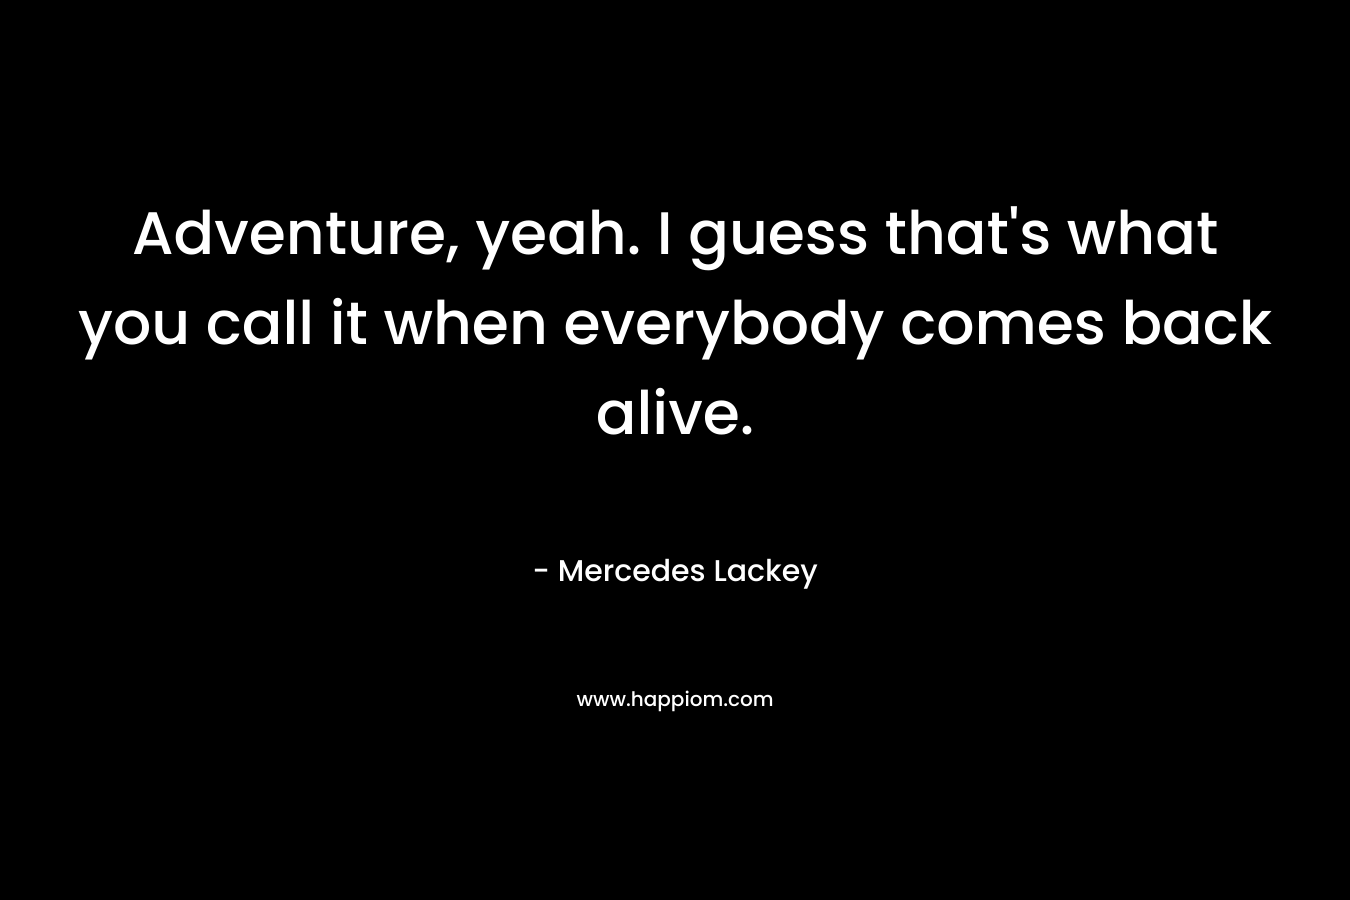 Adventure, yeah. I guess that's what you call it when everybody comes back alive.